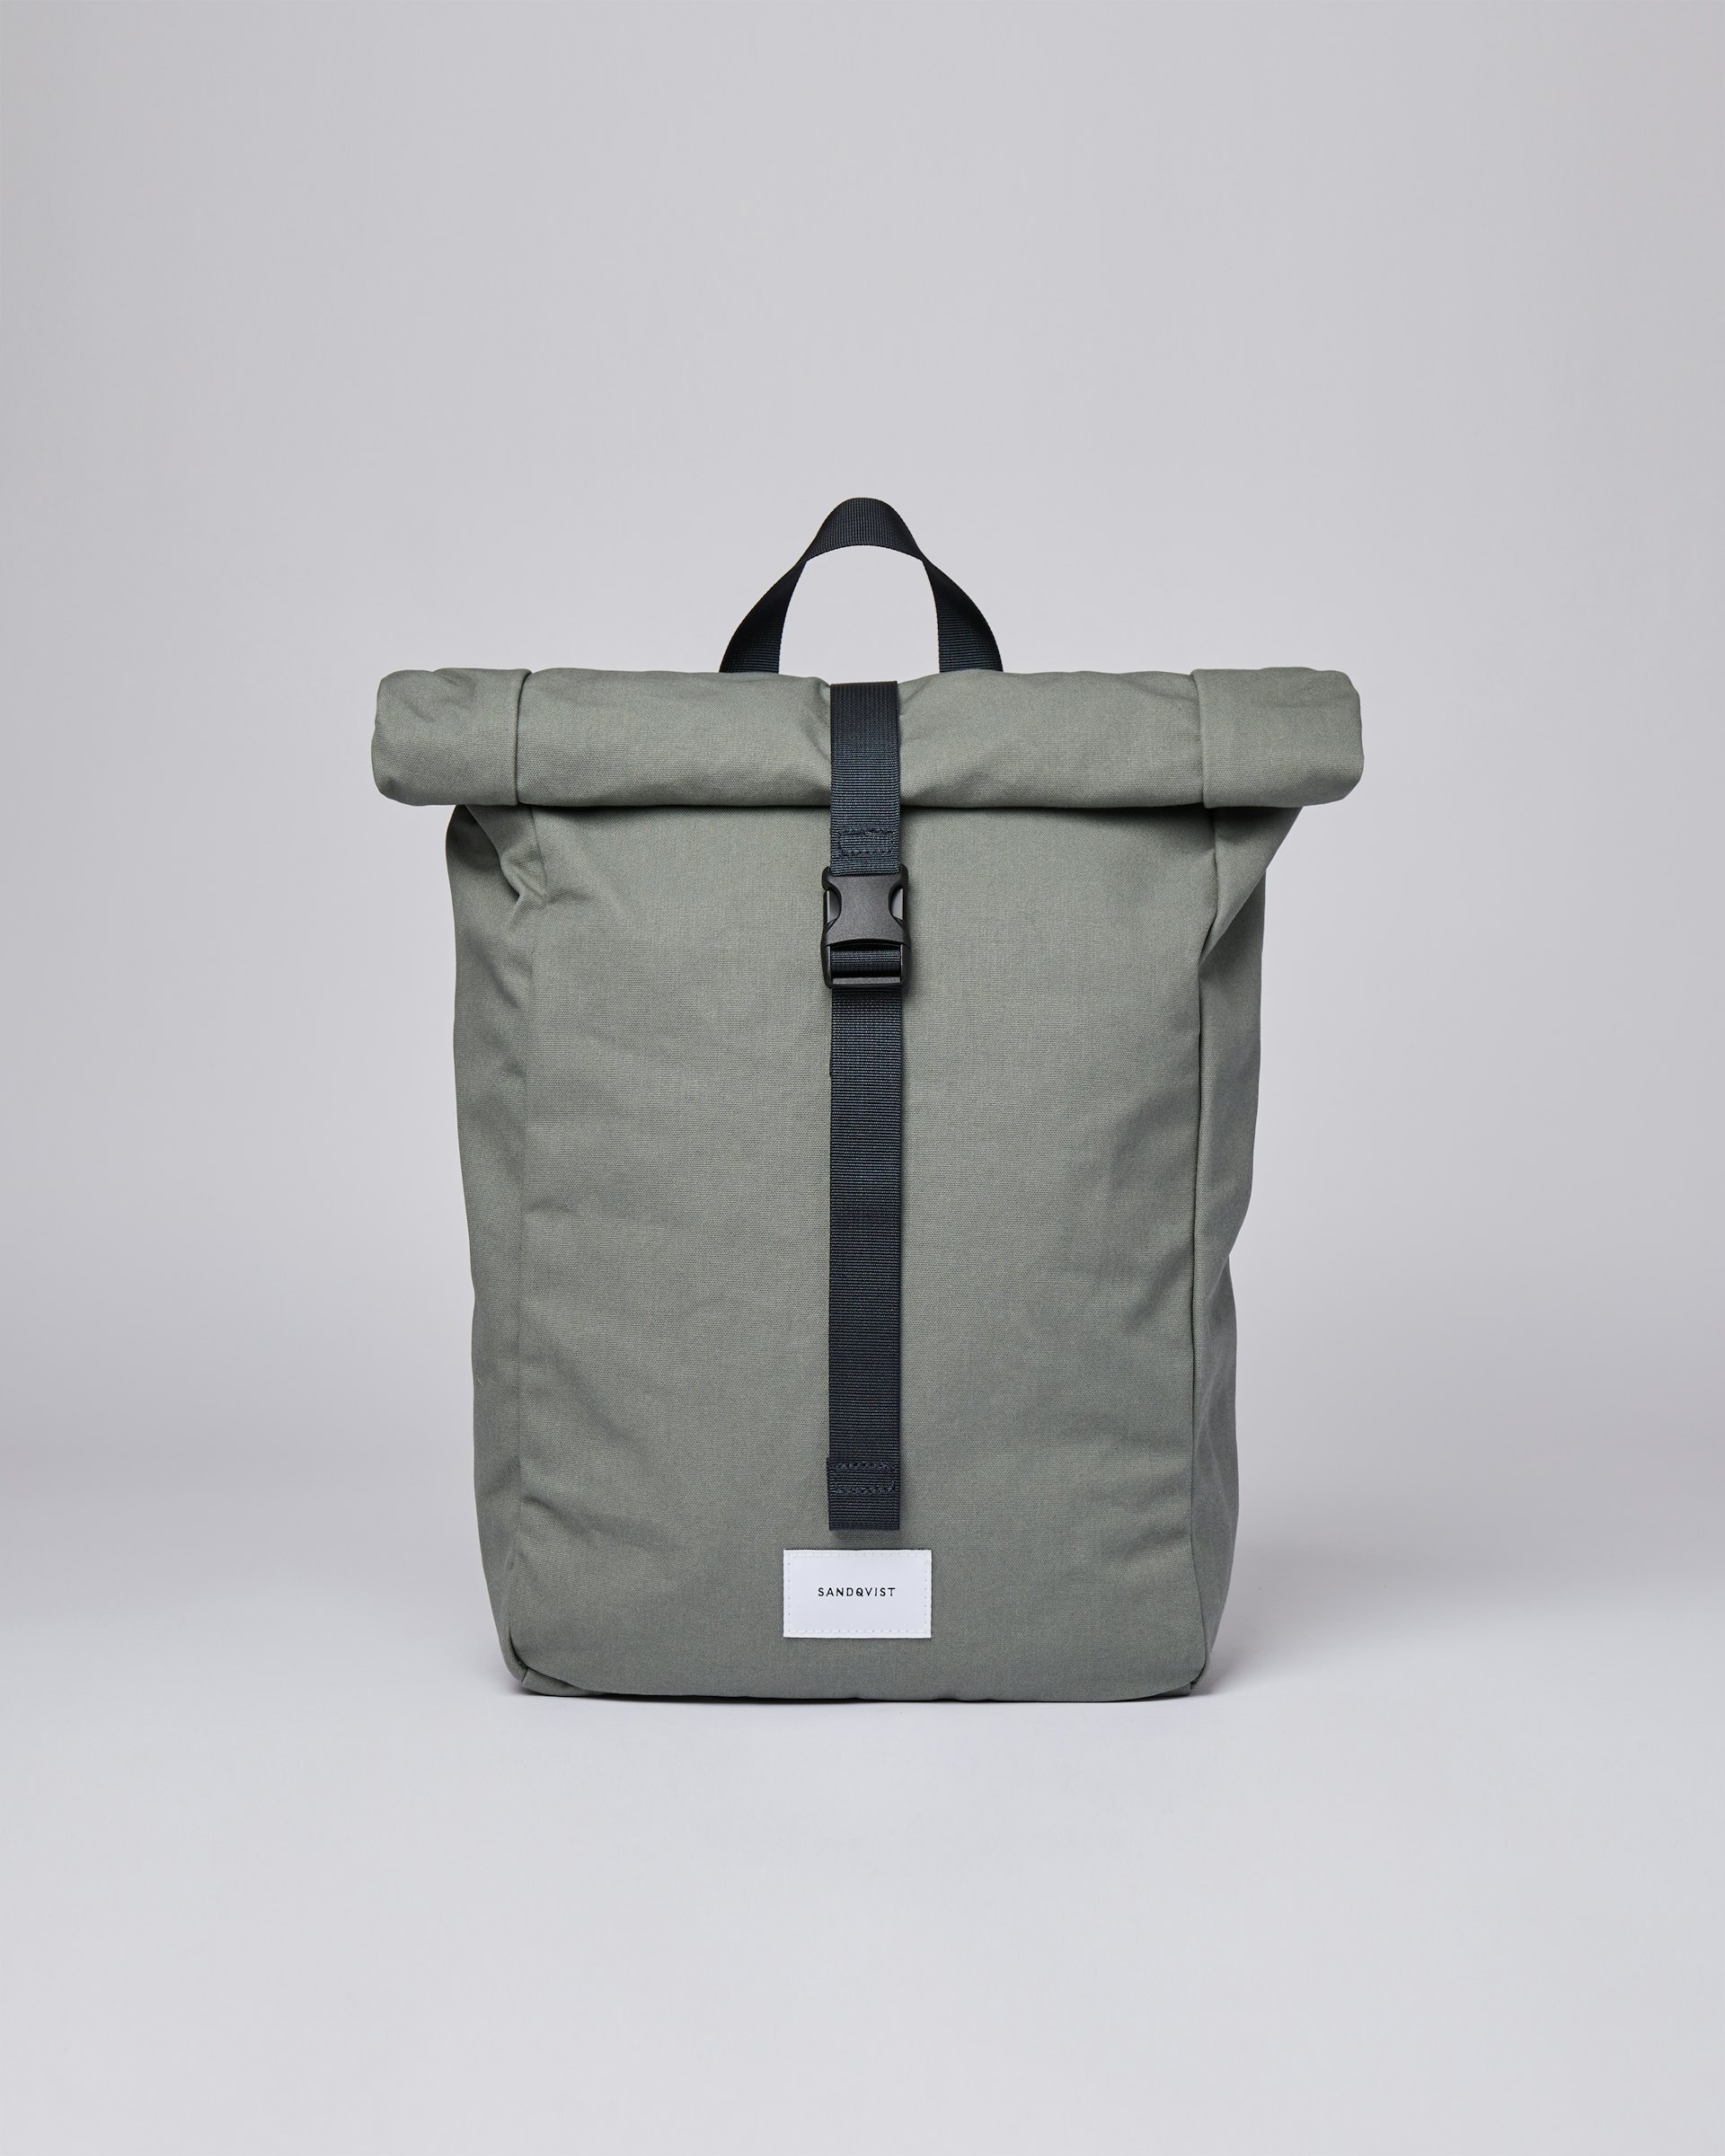 Kaj belongs to the category Backpacks and is in color dusty green (1 of 7)